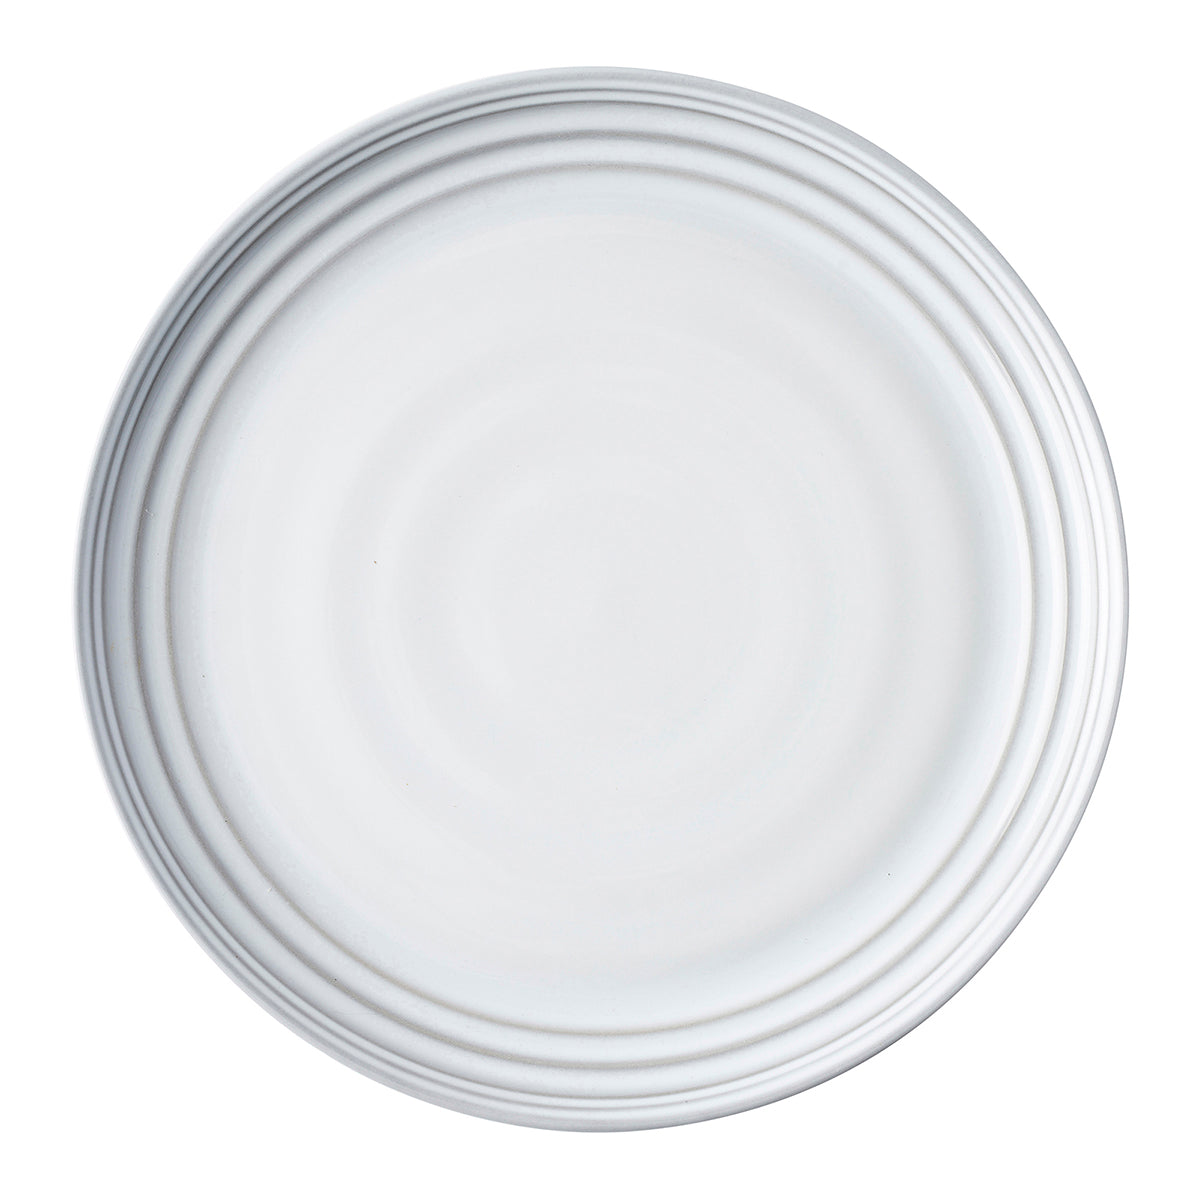 From our Bilbao Collection- Hand hewn in a classic coupe shape, this dinner plate will elevate any casual gathering with a stunning combination of modernity and patina.